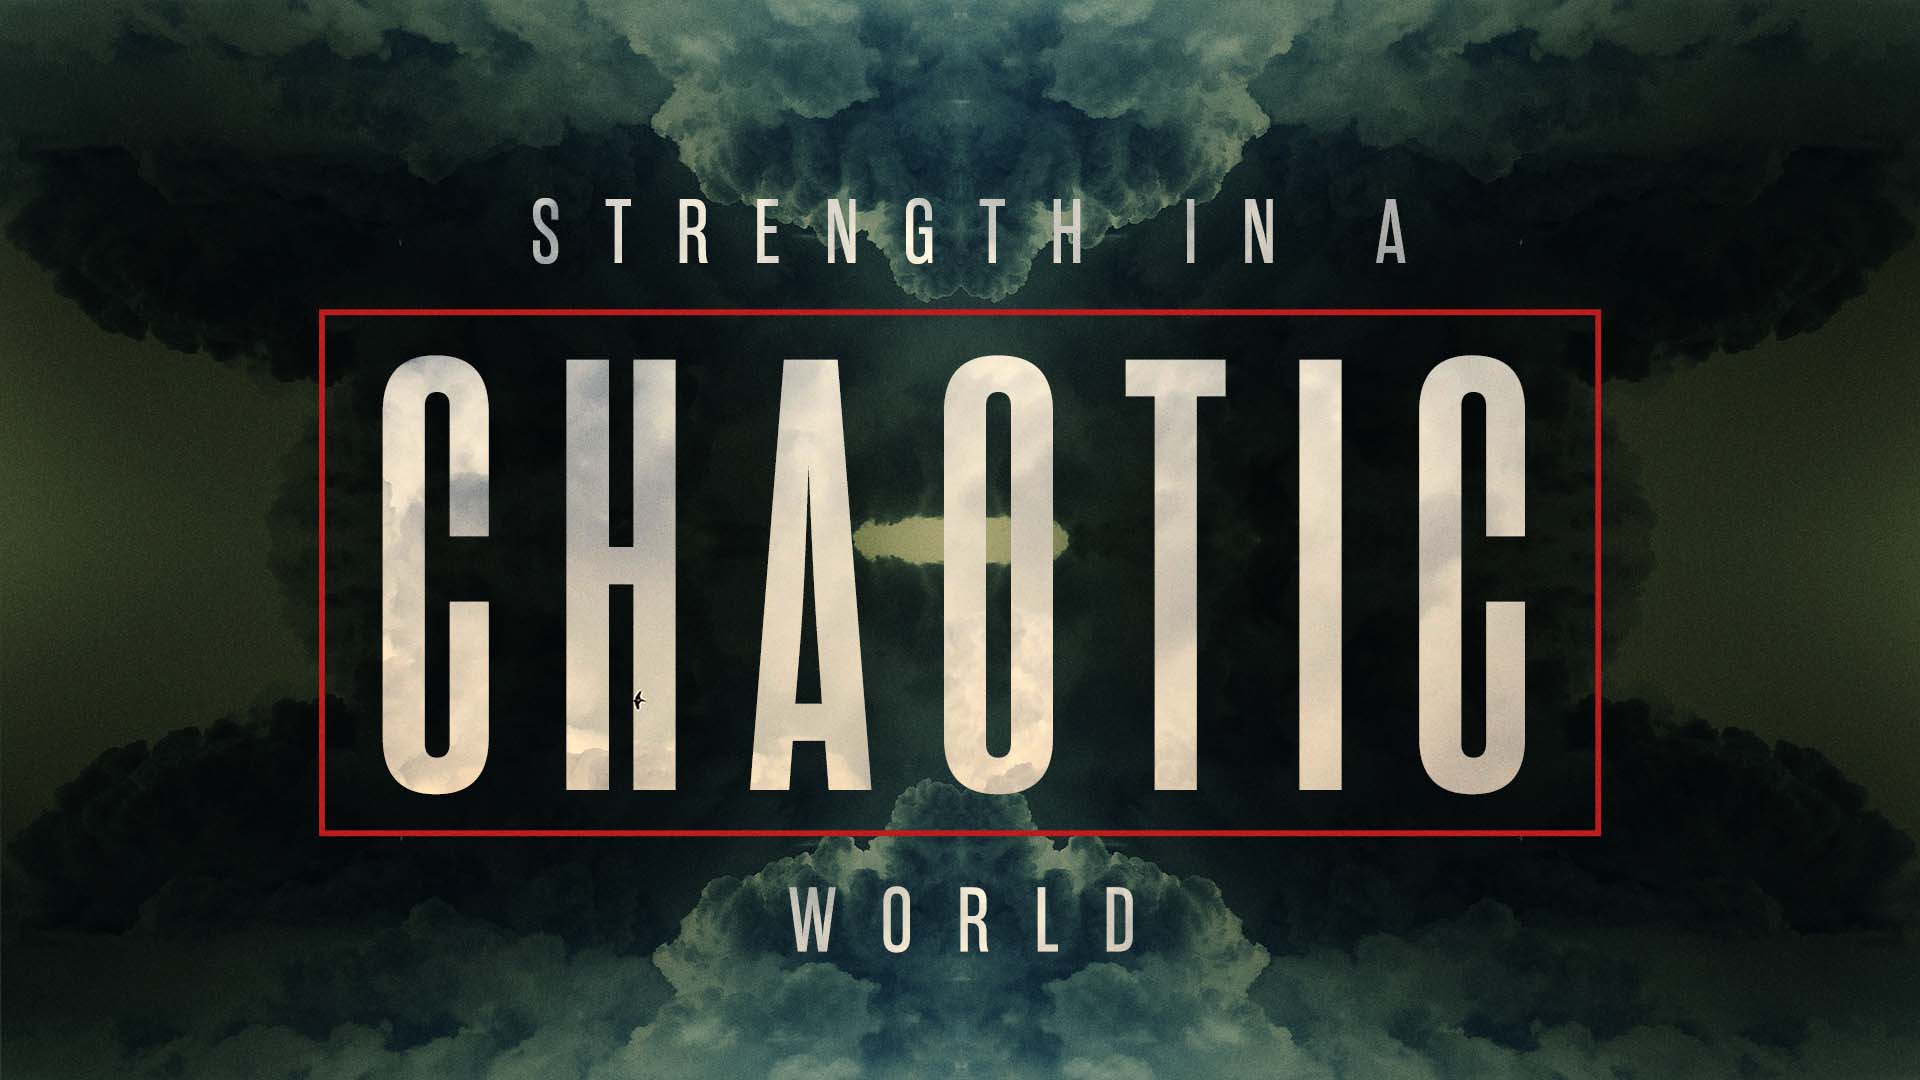 Strength in a Chaotic World